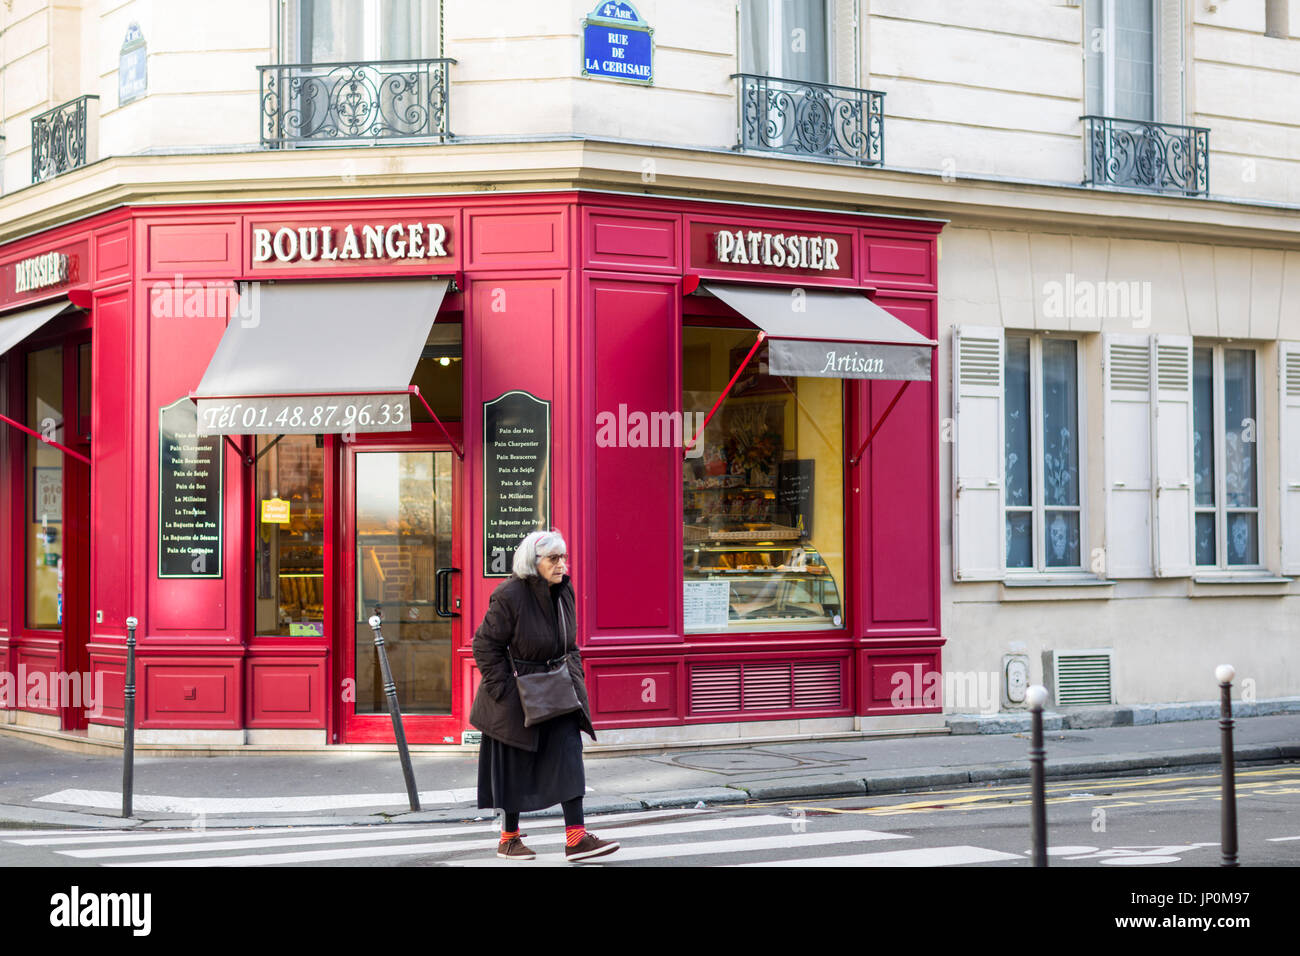 Paris, France - March 2, 2016: Woman crossing street by red bakery and pastry shop on the corner of rue du Petit Musc and rue de la Cerisaie in the Marais, Paris. Stock Photo